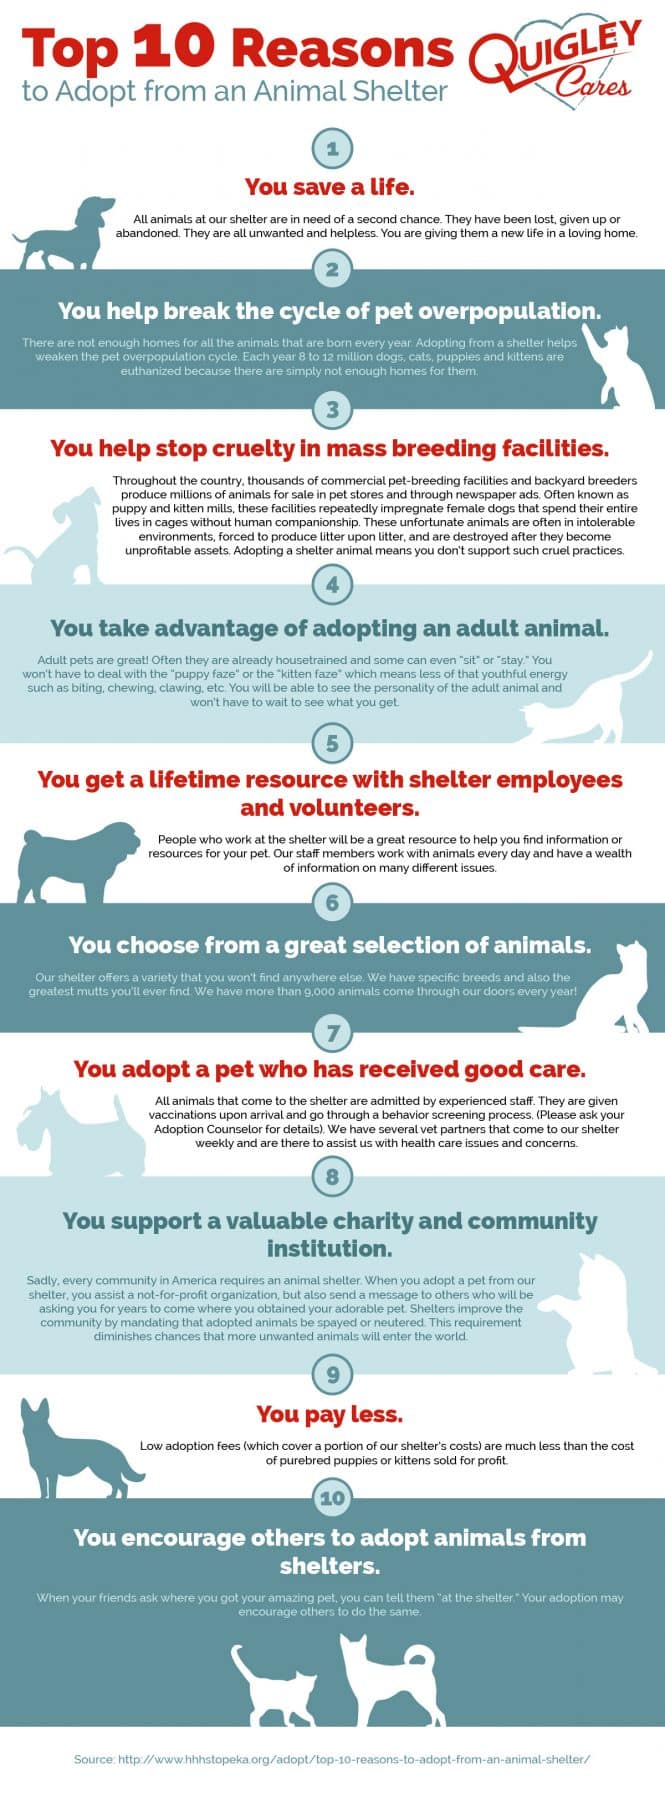 Top 10 Reasons to Adopt from an Animal Shelter - Quigley Heating & AC